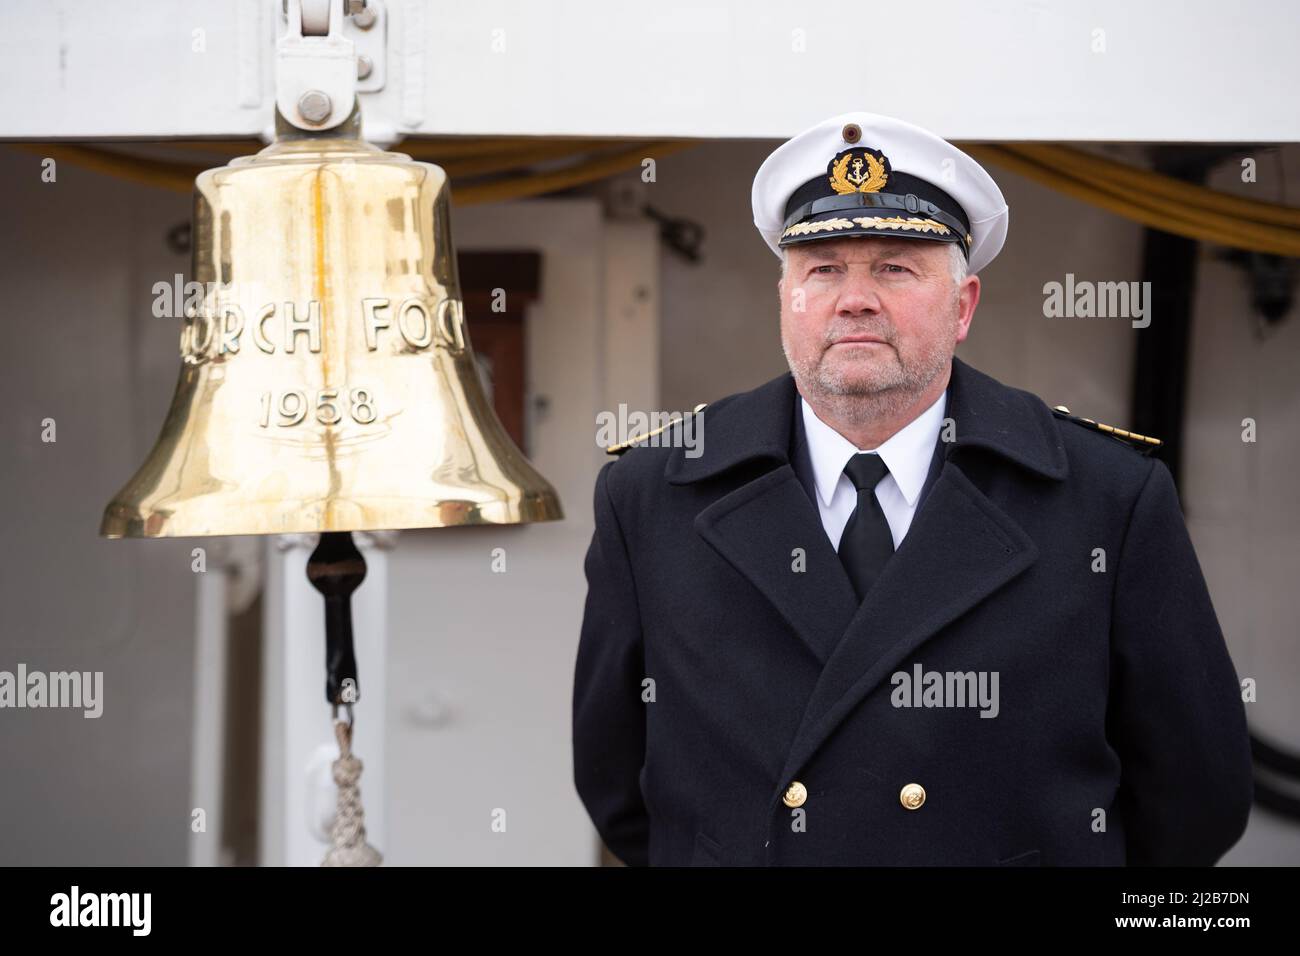 Kiel, Germany. 31st Mar, 2022. Captain (See) Nils Brandt stands on board the Gorch Fock during the handover of command to his successor. After eight years, Captain Brandt has handed over command of the sail training ship Gorch Fock to Captain Graf von Kielmansegg. Credit: Daniel Reinhardt/dpa/Alamy Live News Stock Photo